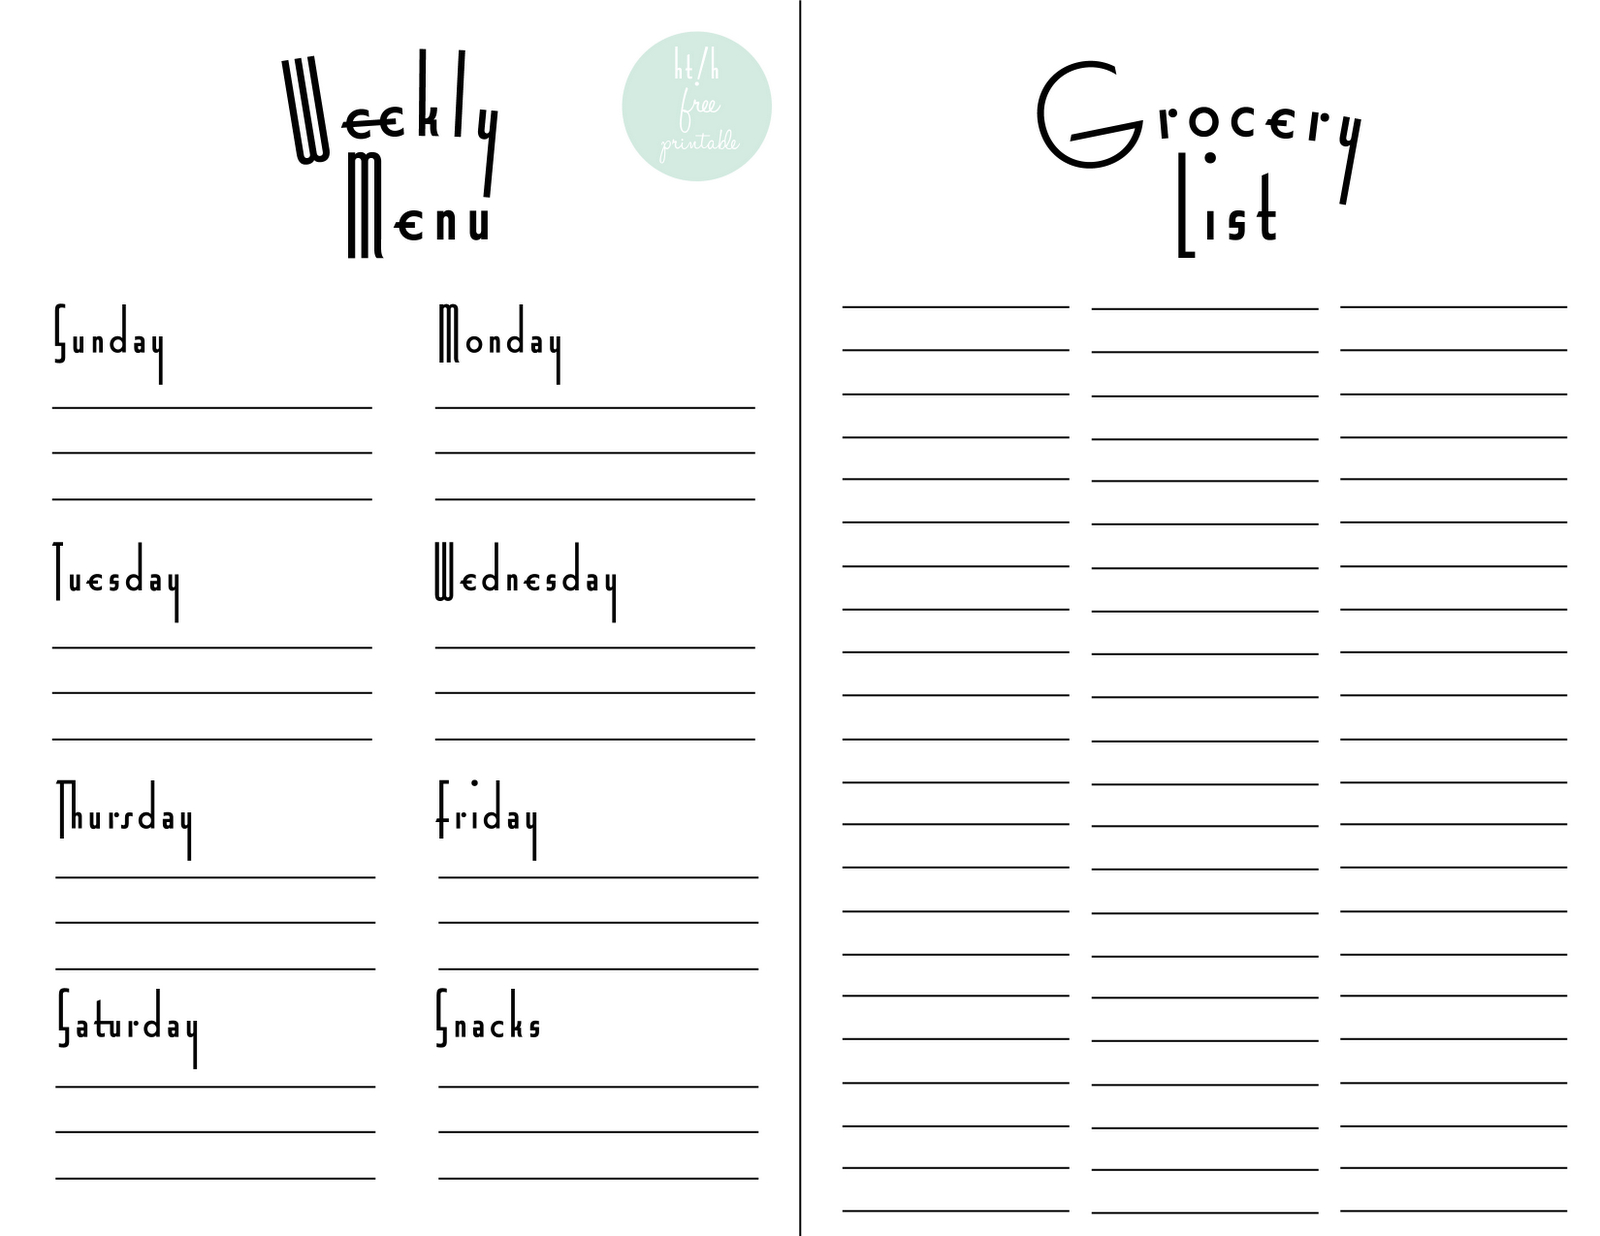 Weekly Menu Planner &amp;amp; Grocery List Free Printable | For The Home - Free Printable Grocery List And Meal Planner